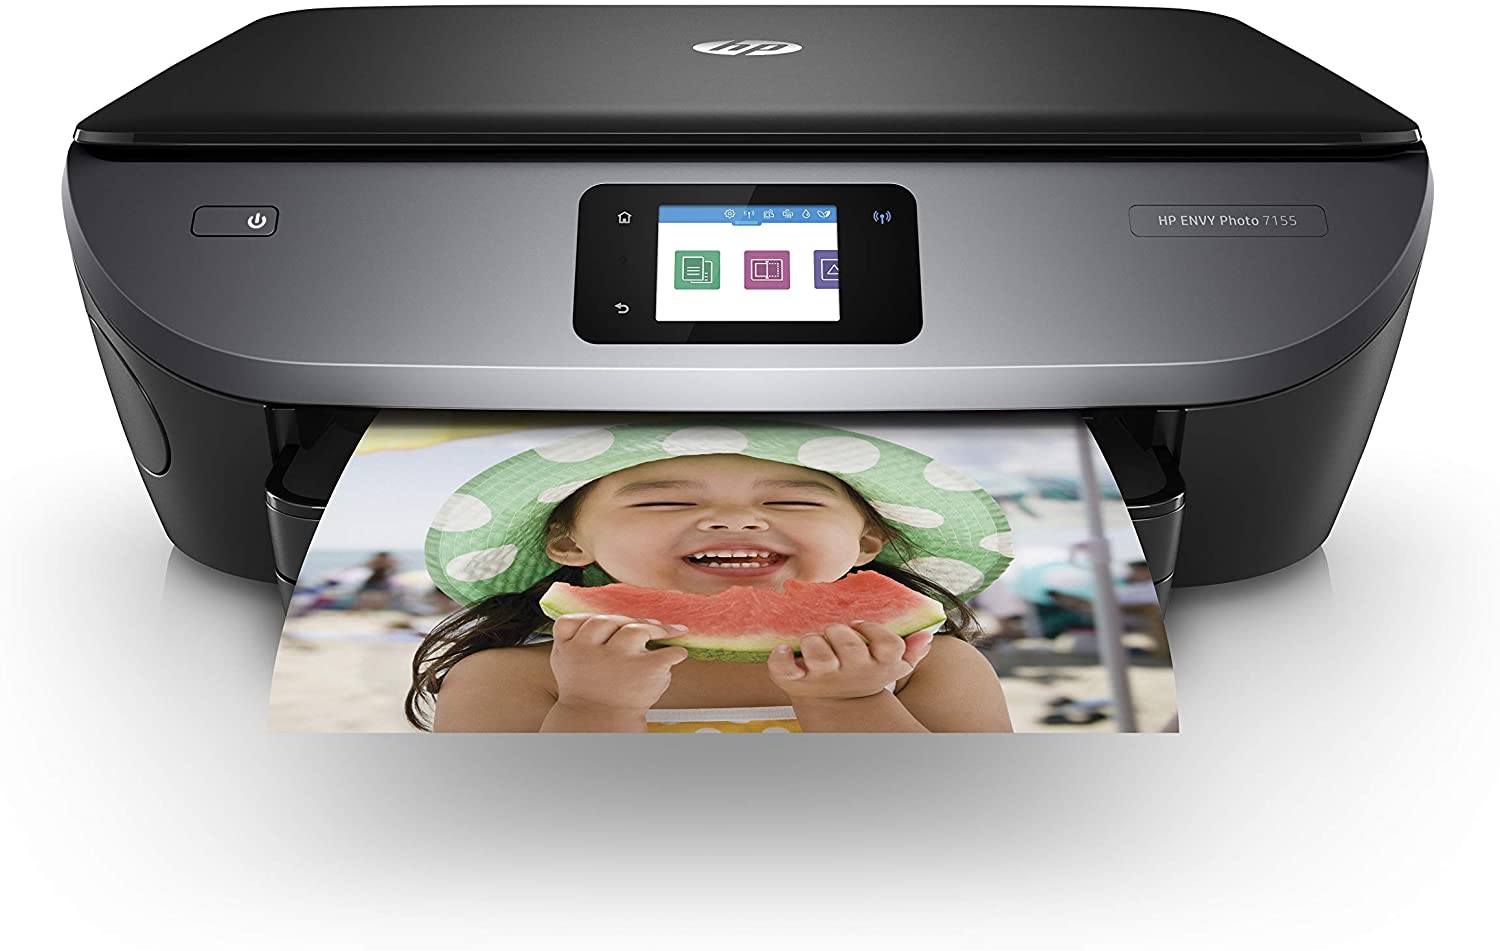 Best Printers for Mac in 2021: top printers for your Mac and other Apple devices